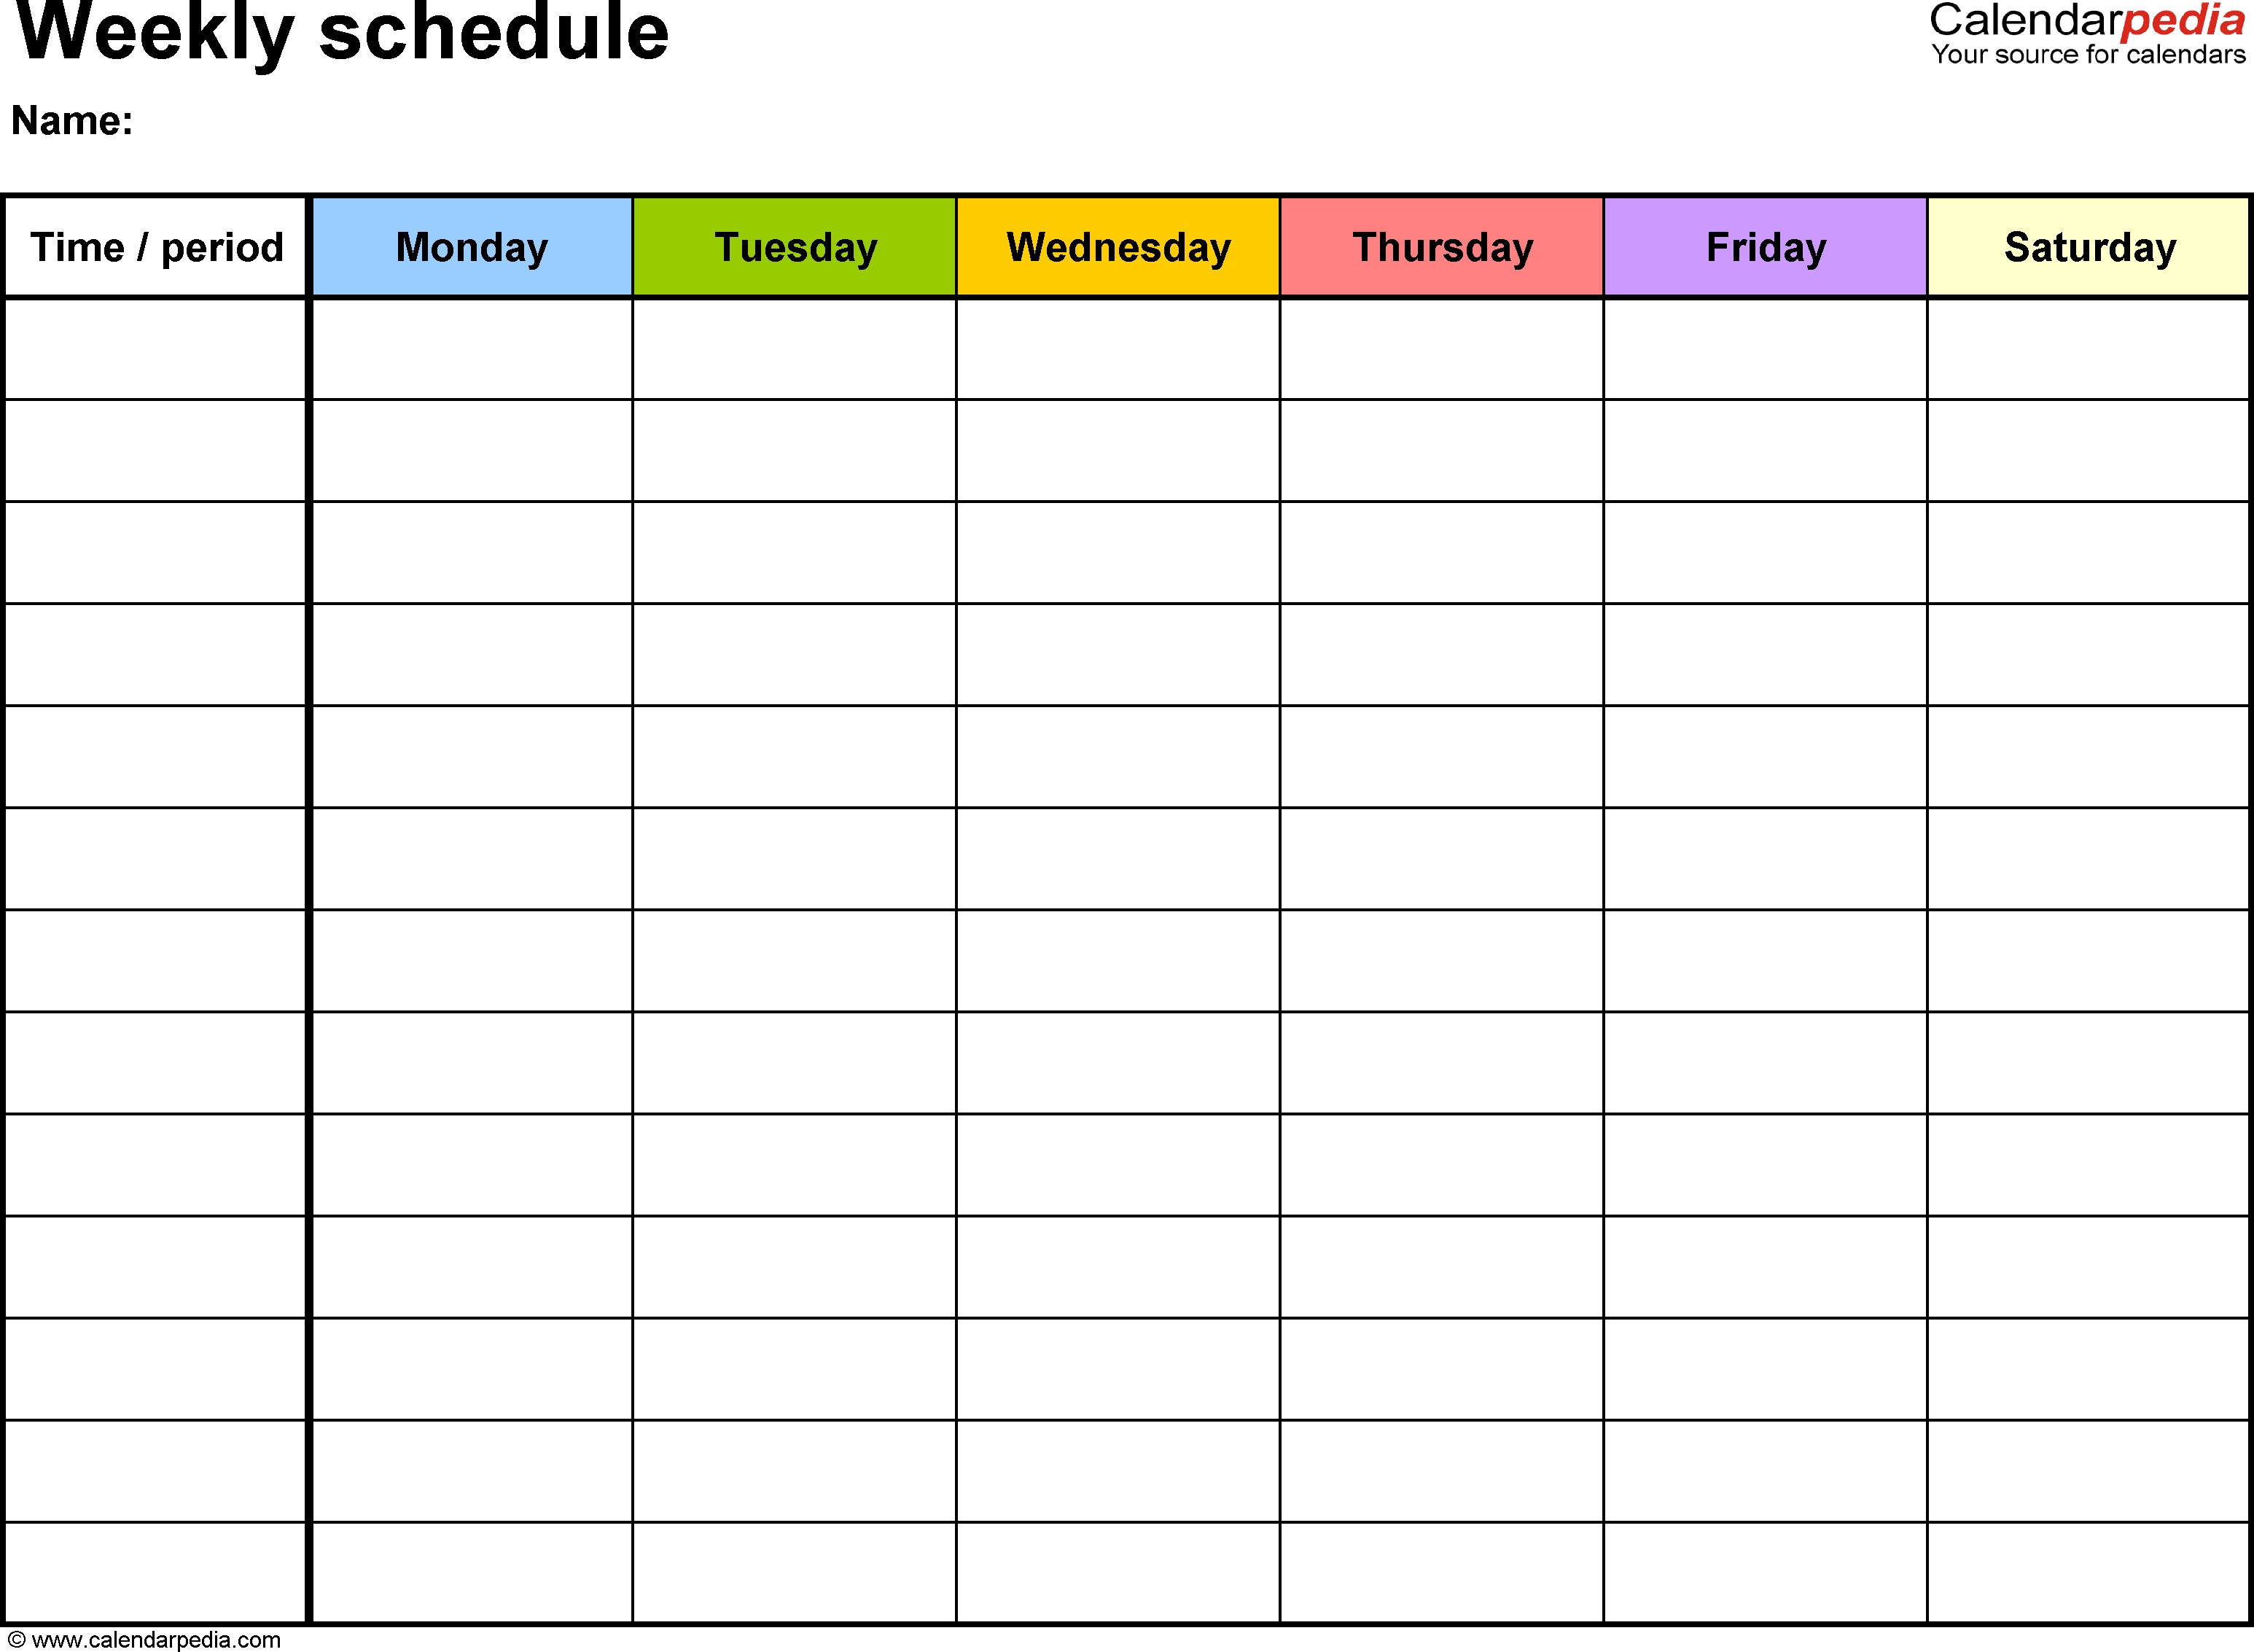 Free Weekly Schedule Templates For Word - 18 Templates  Monday To Friday Planner